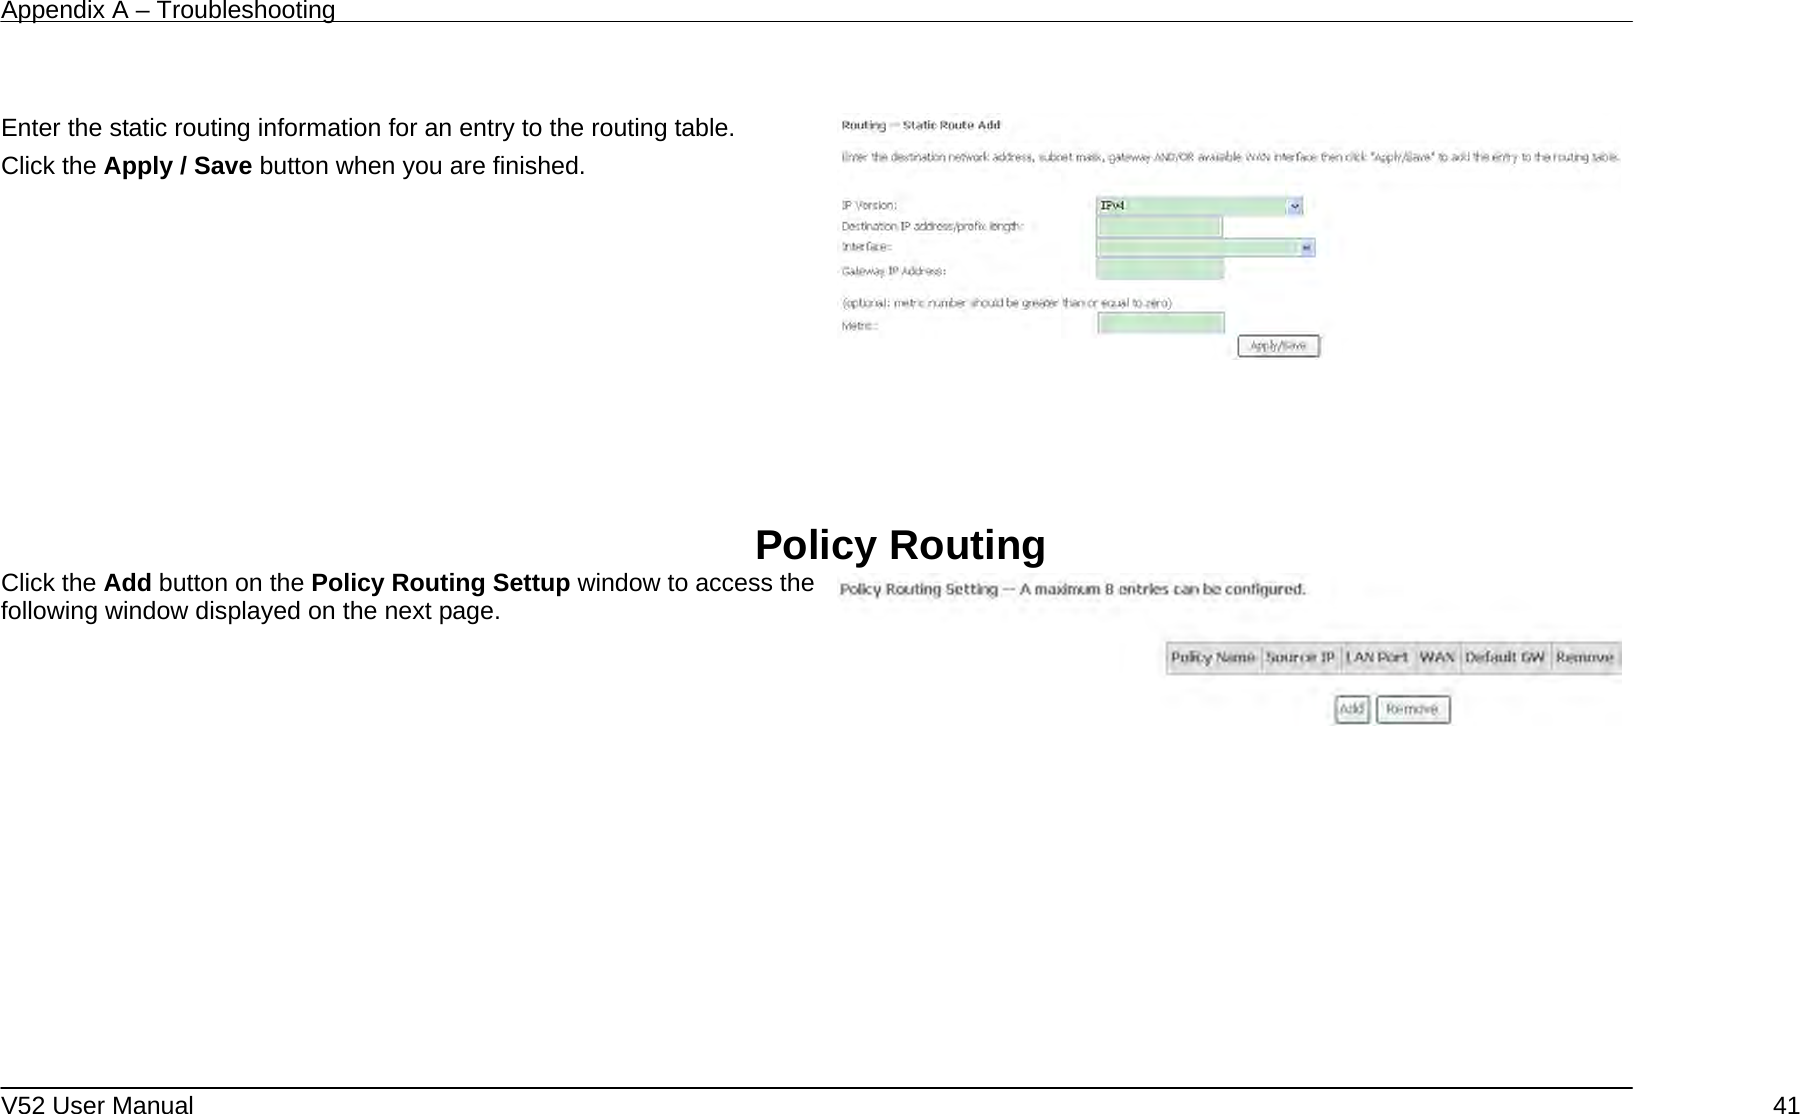 Appendix A – Troubleshooting   V52 User Manual    41 Enter the static routing information for an entry to the routing table. Click the Apply / Save button when you are finished.        Policy Routing Click the Add button on the Policy Routing Settup window to access the following window displayed on the next page.     